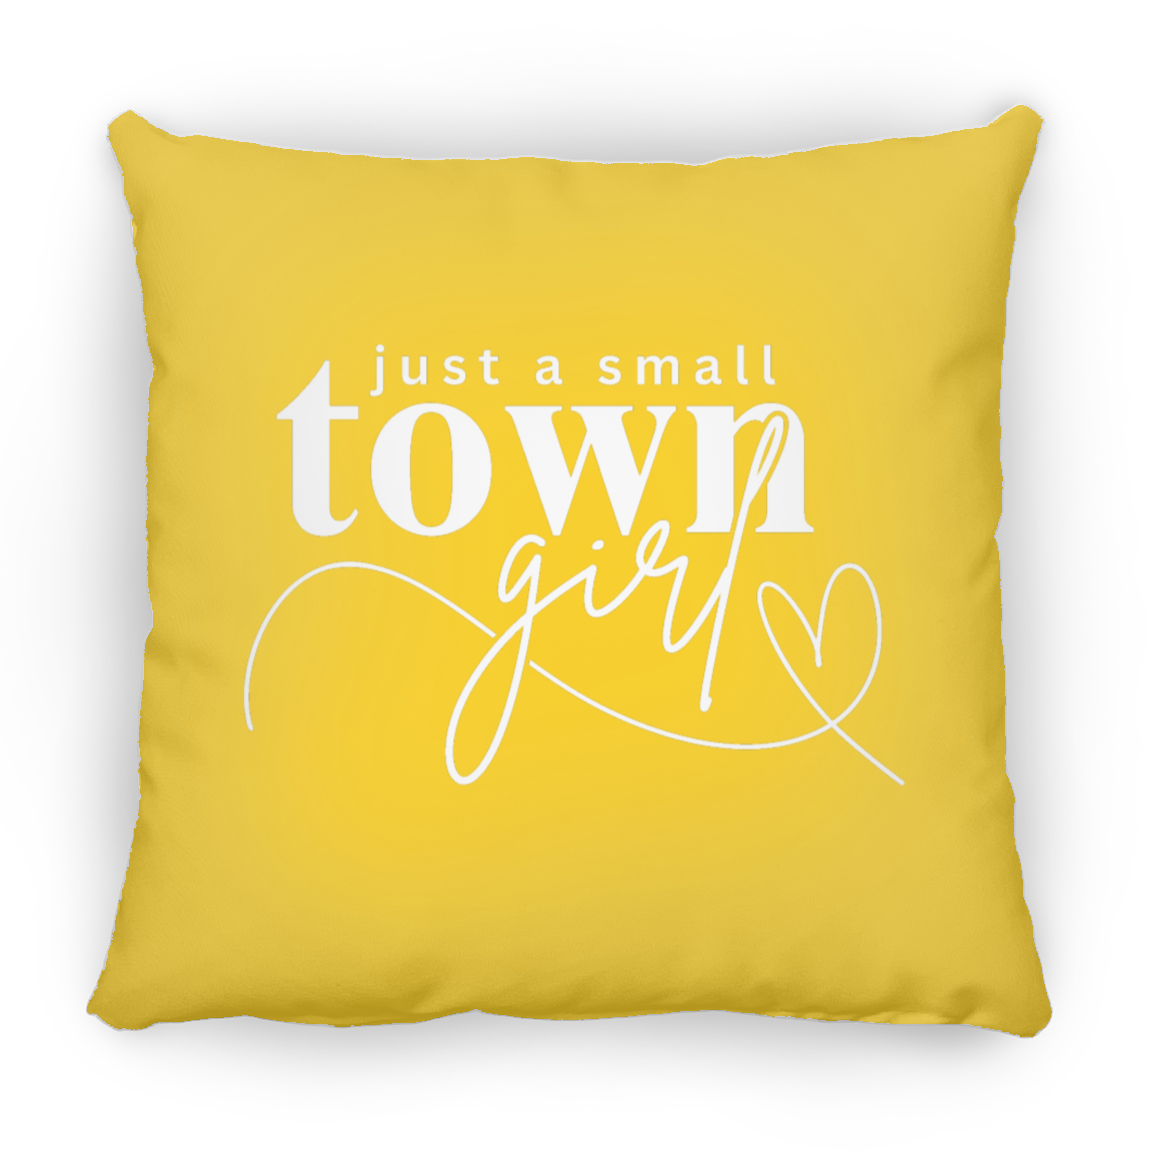 Small Square Pillow 14x14, Just a Small Town Girl, White Print